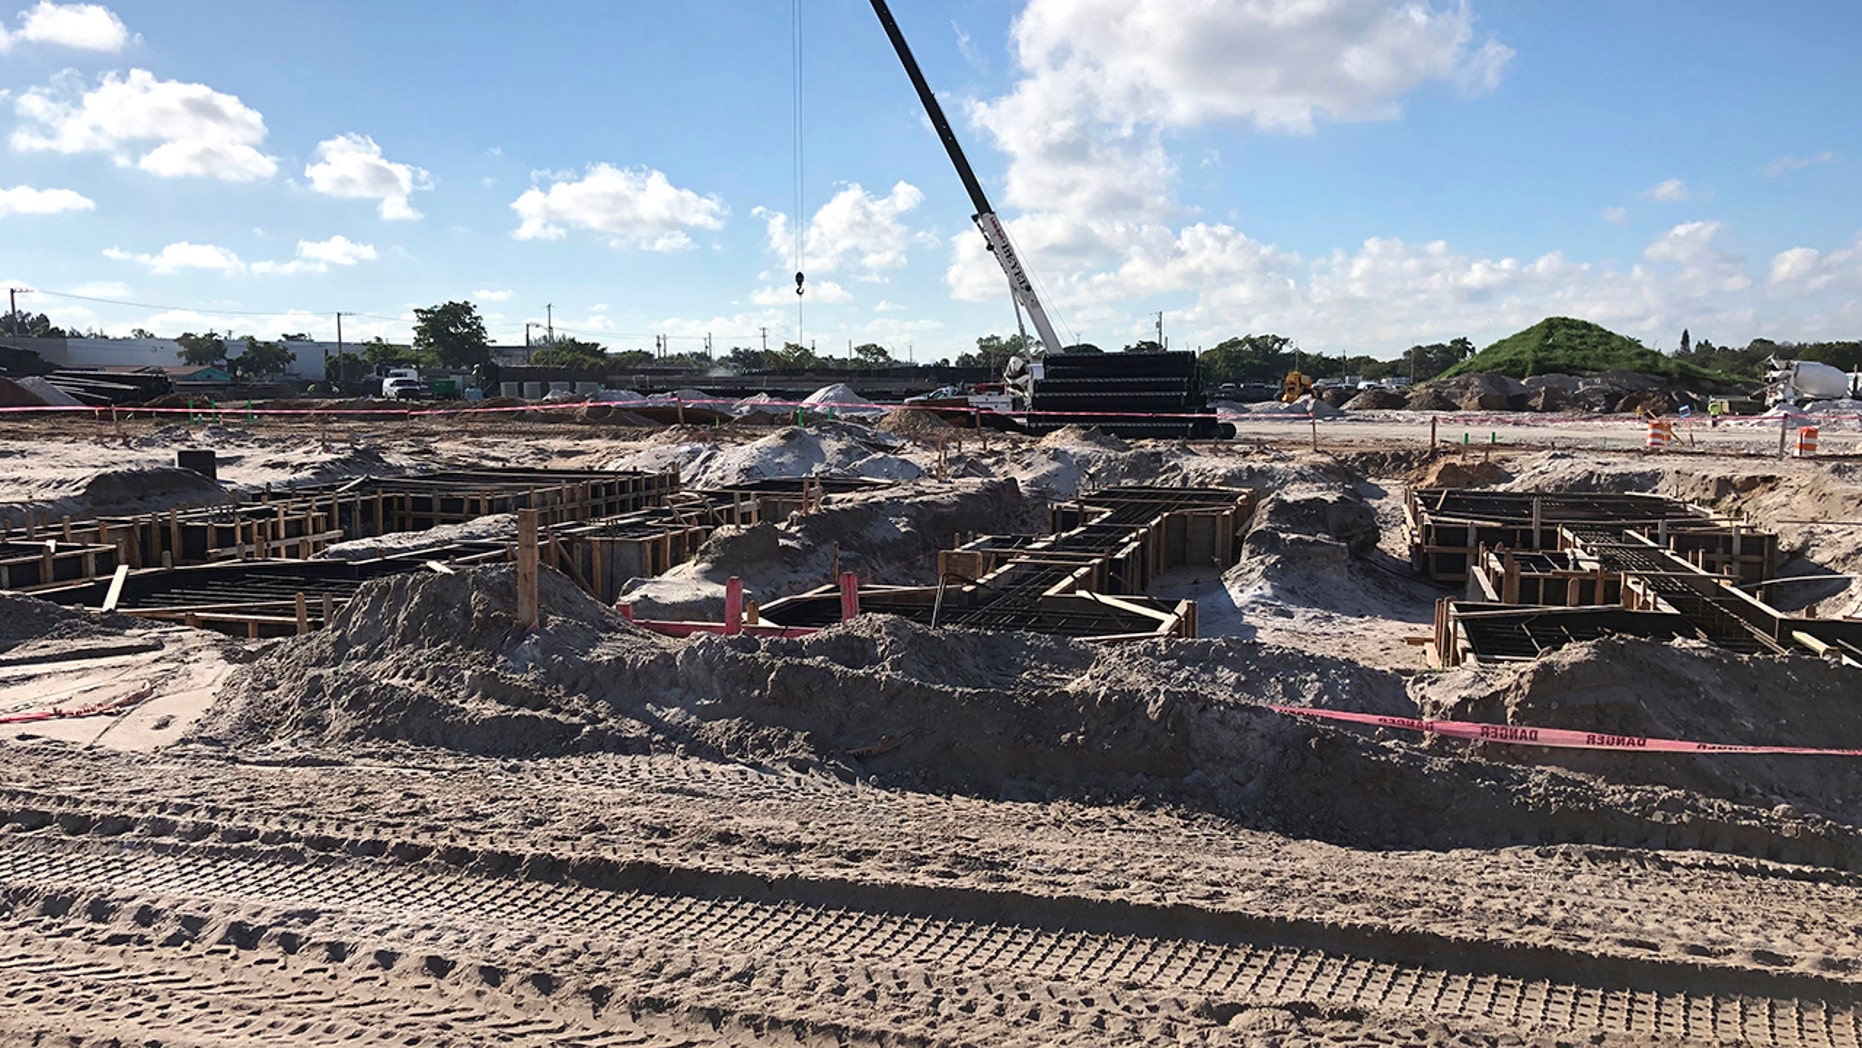 This Monday, Oct. 21, 2019, photo shows construction continuing at the stadium site for David Beckham’s MLS soccer team that will debut in 2020 at the site of the former Lockhart Stadium in Fort Lauderdale, Fla. (AP Photo/Tim Reynolds)